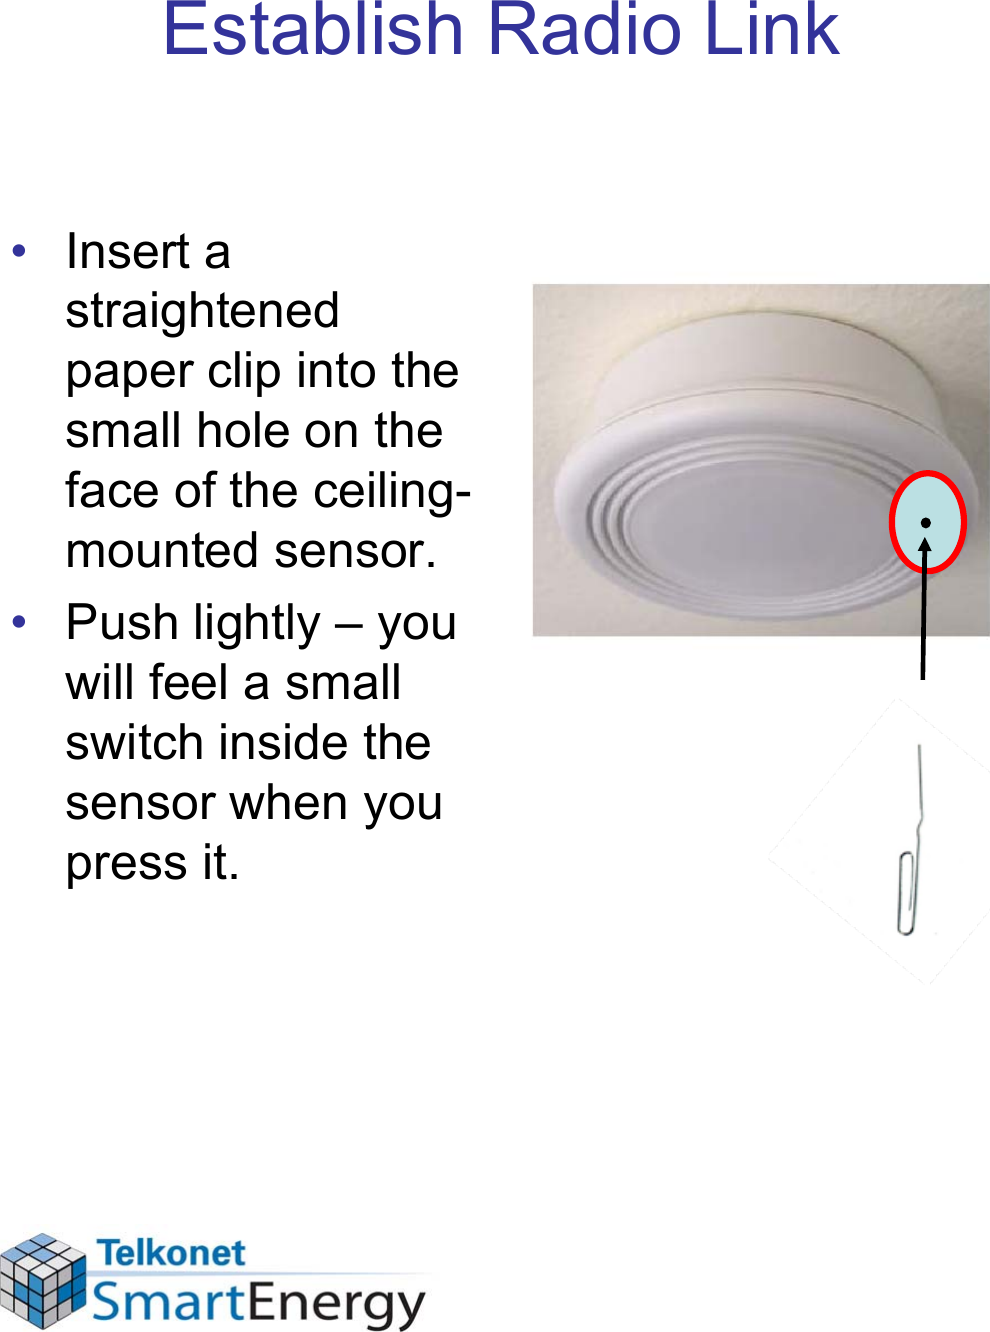 Establish Radio Link• Insert a straightened paper clip into the small hole on the face of the ceiling- mounted sensor.• Push lightly – you will feel a small switch inside the sensor when you press it.